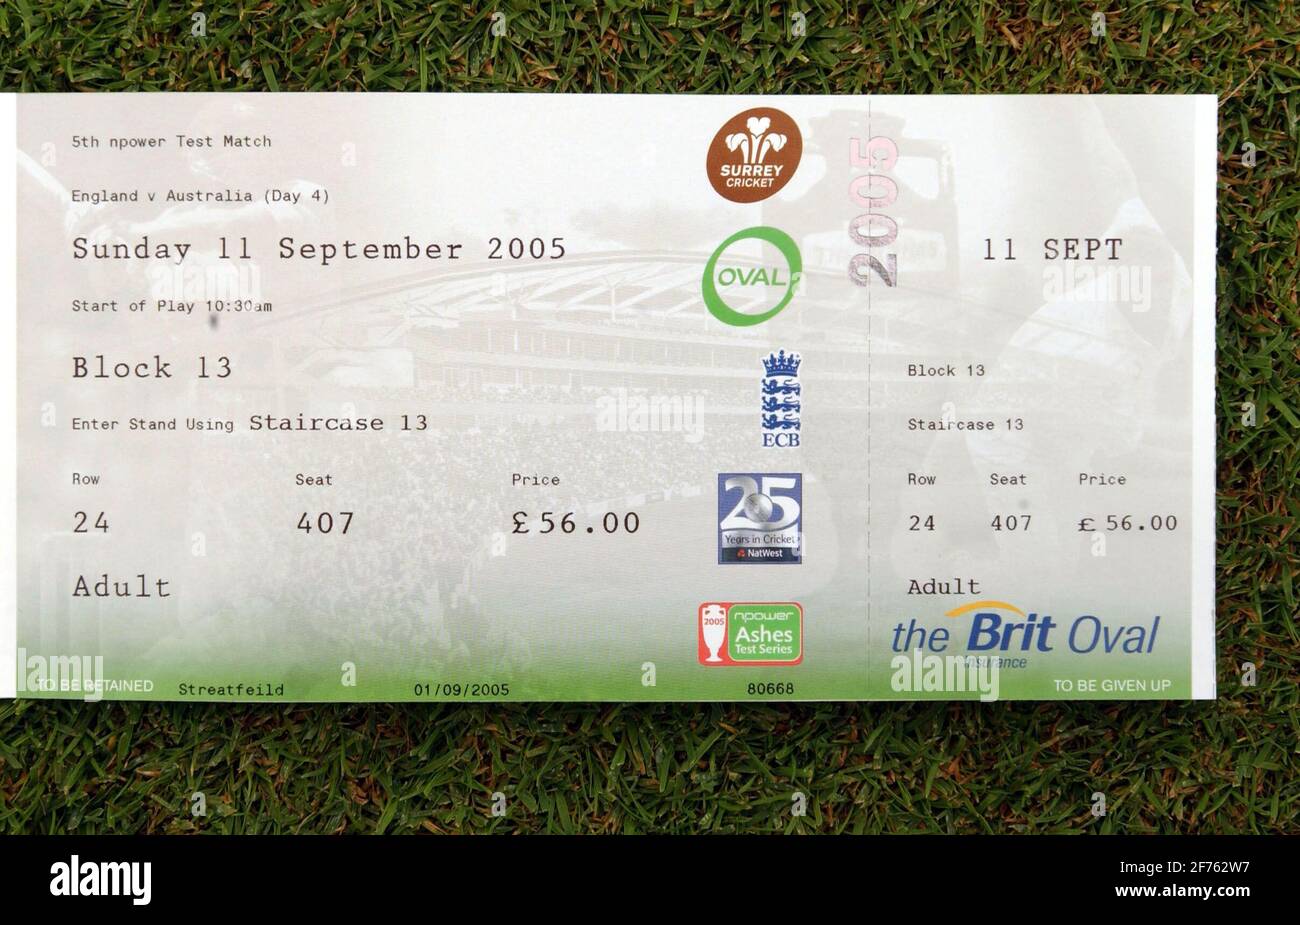 A TICKET FOR THE OVAL TEST MATCH.7/9/05 TOM PILSTON Stock Photo